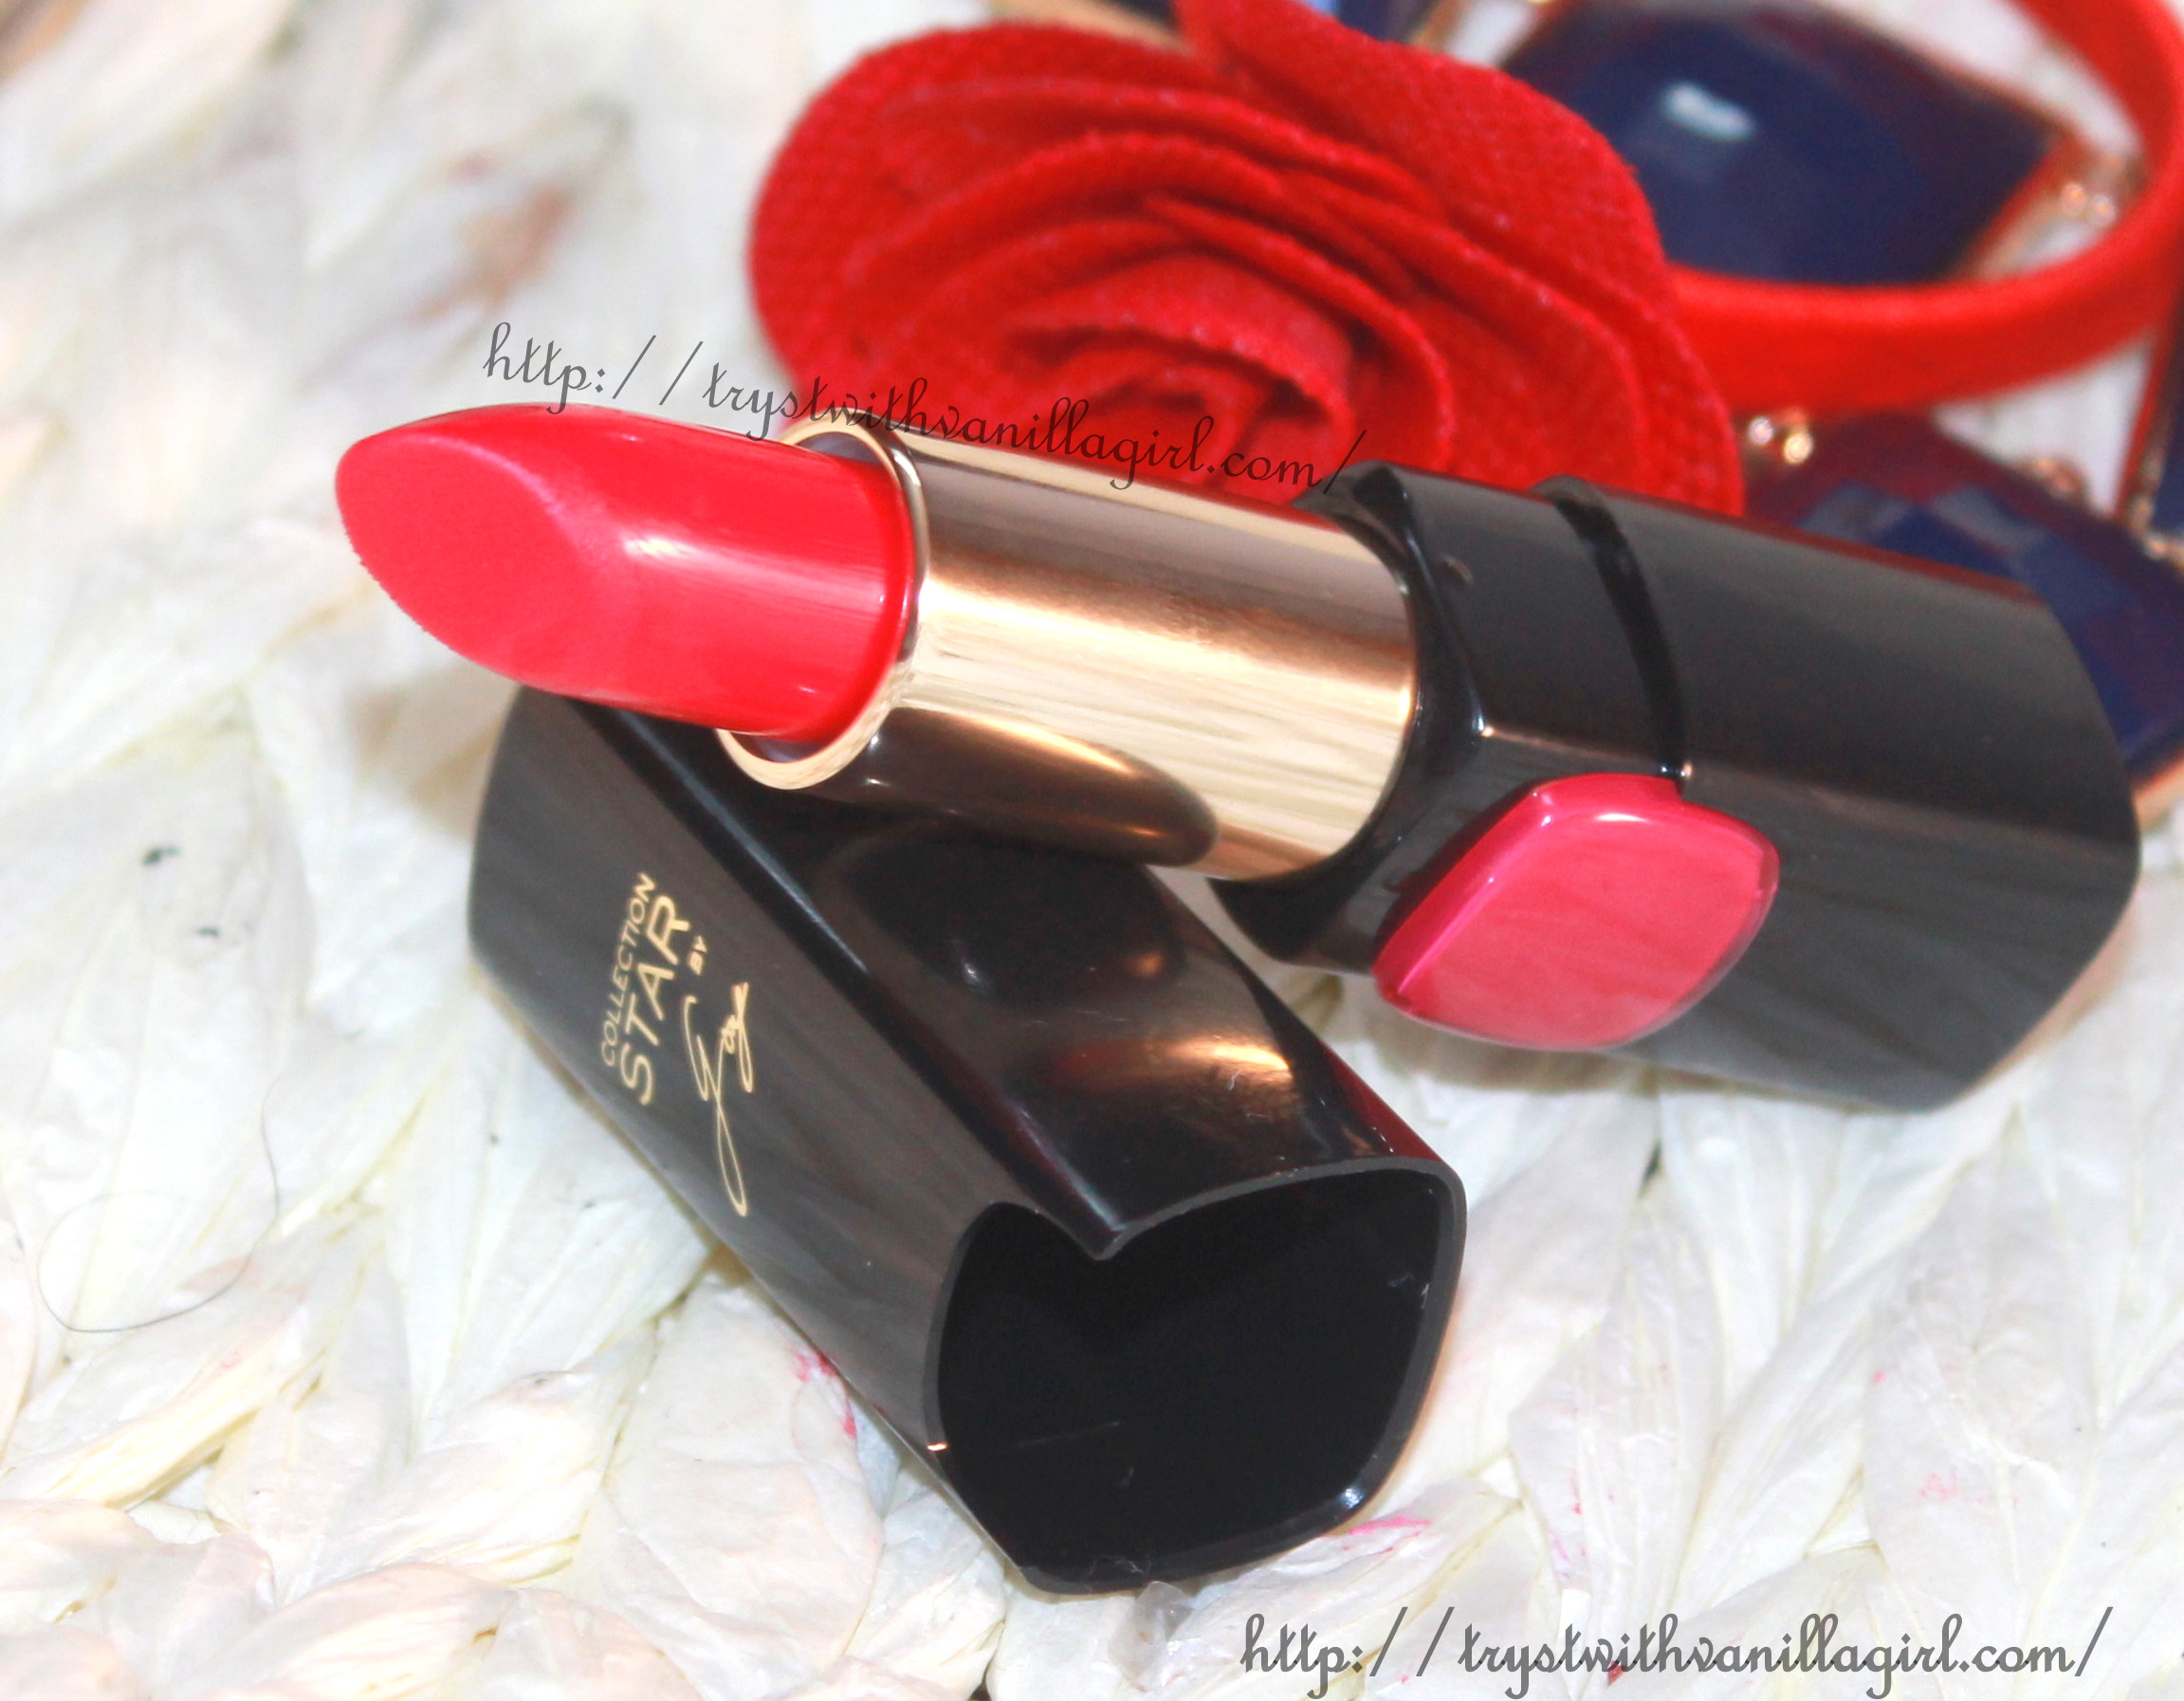 L'Oreal Color Riche Star Collection Pure Reds Lipstick Pure Amaranthe Review,Swatch,Photos